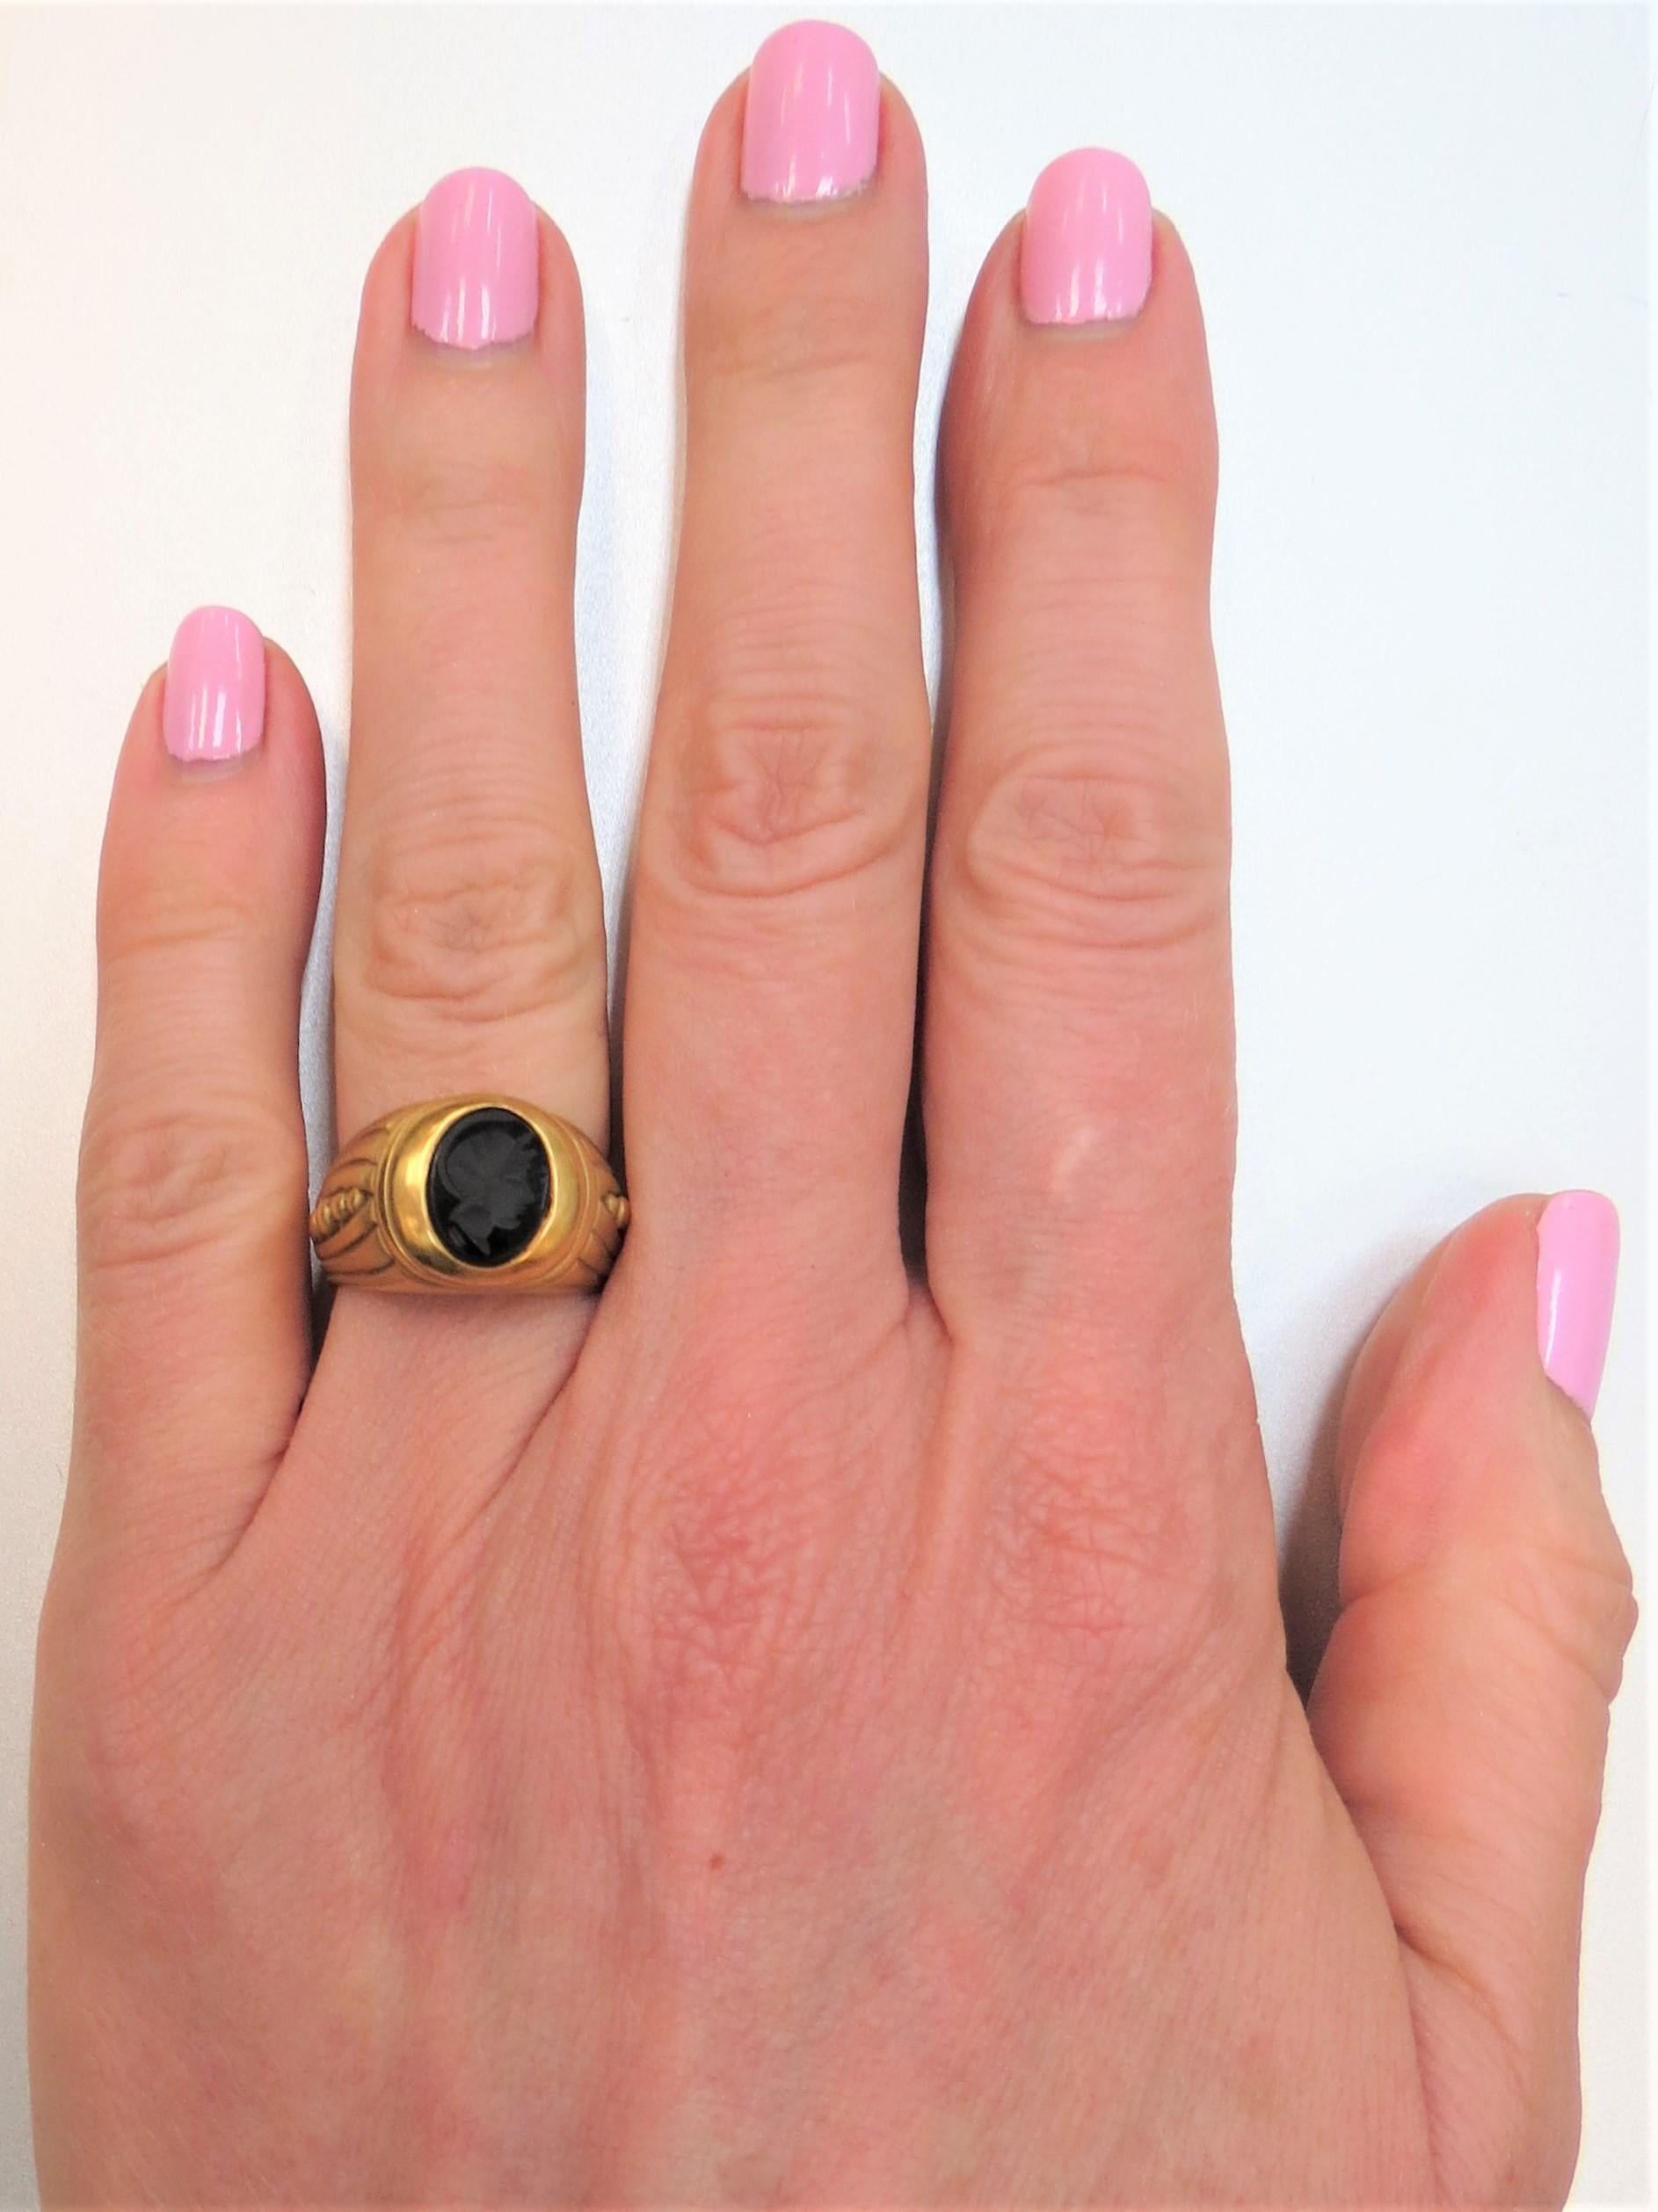 18K yellow gold ring, matte gold finish, set in center with one oval piece of carved black onyx Intaglio
Finger size 6, may be sized